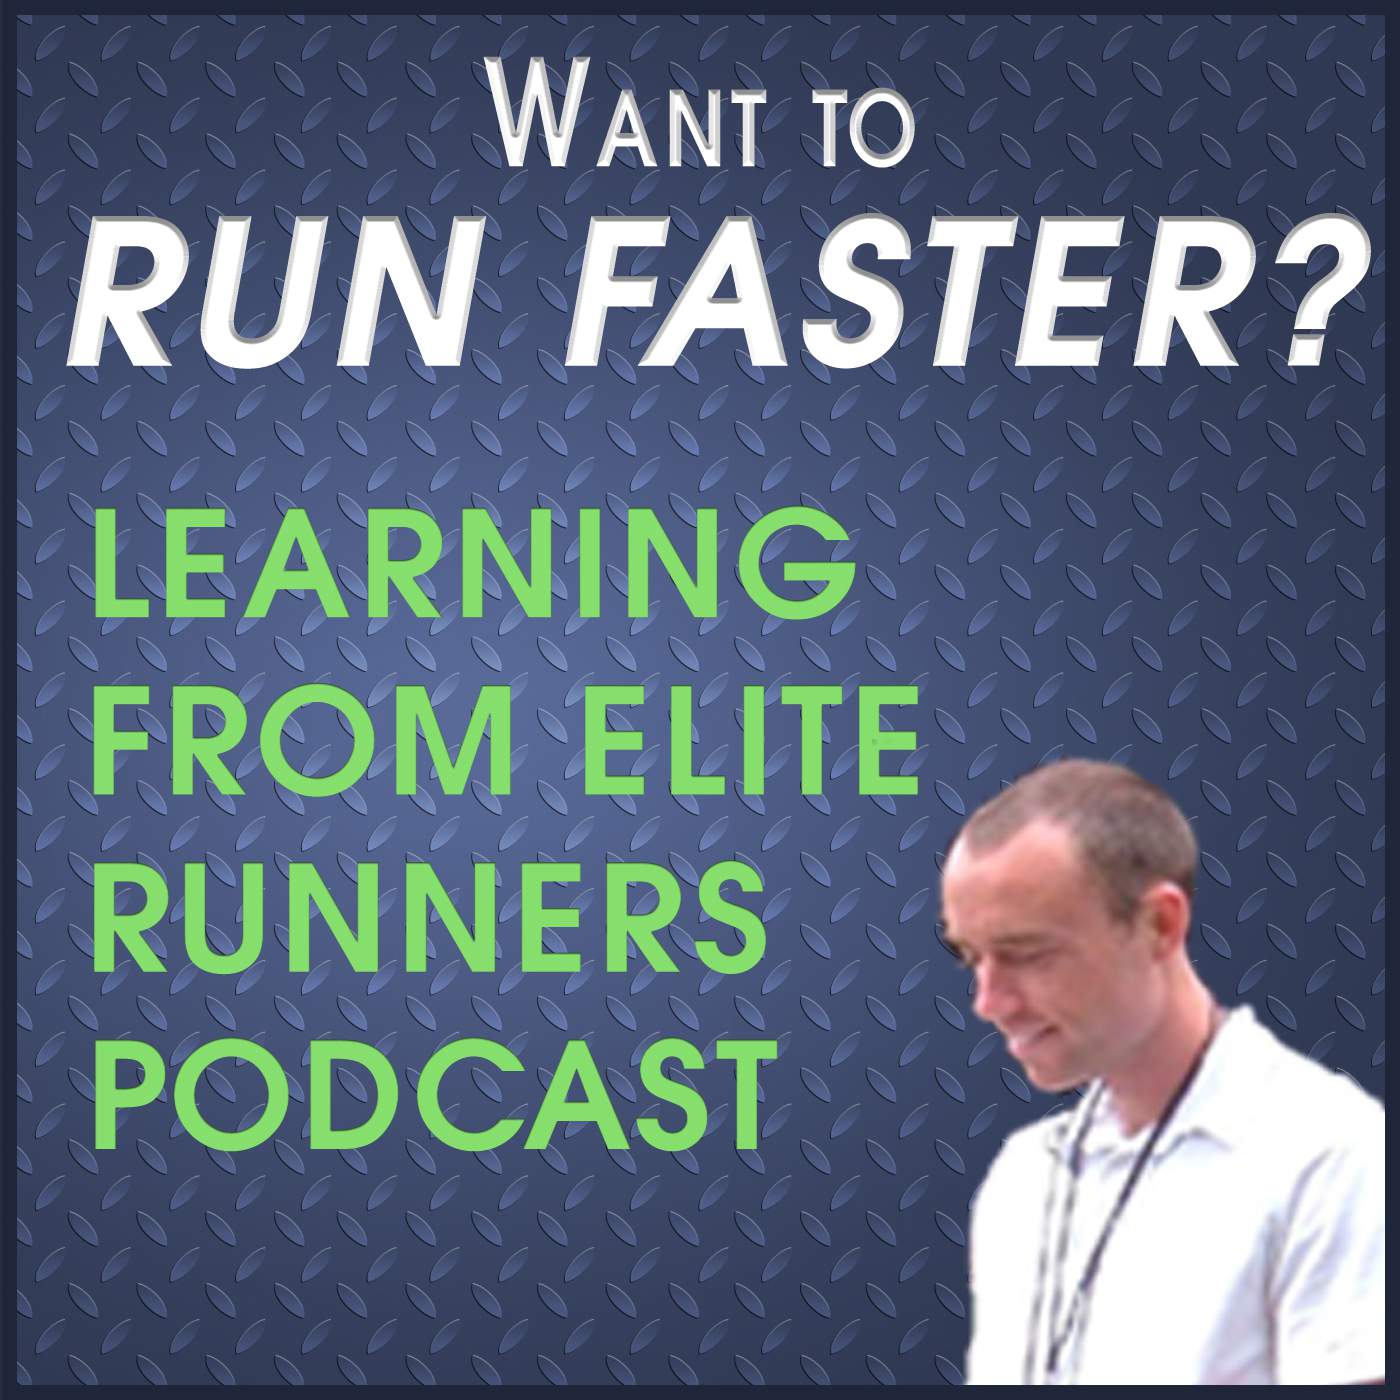 How to Make Running Faster Simple: An Interview With Steve Moneghetti